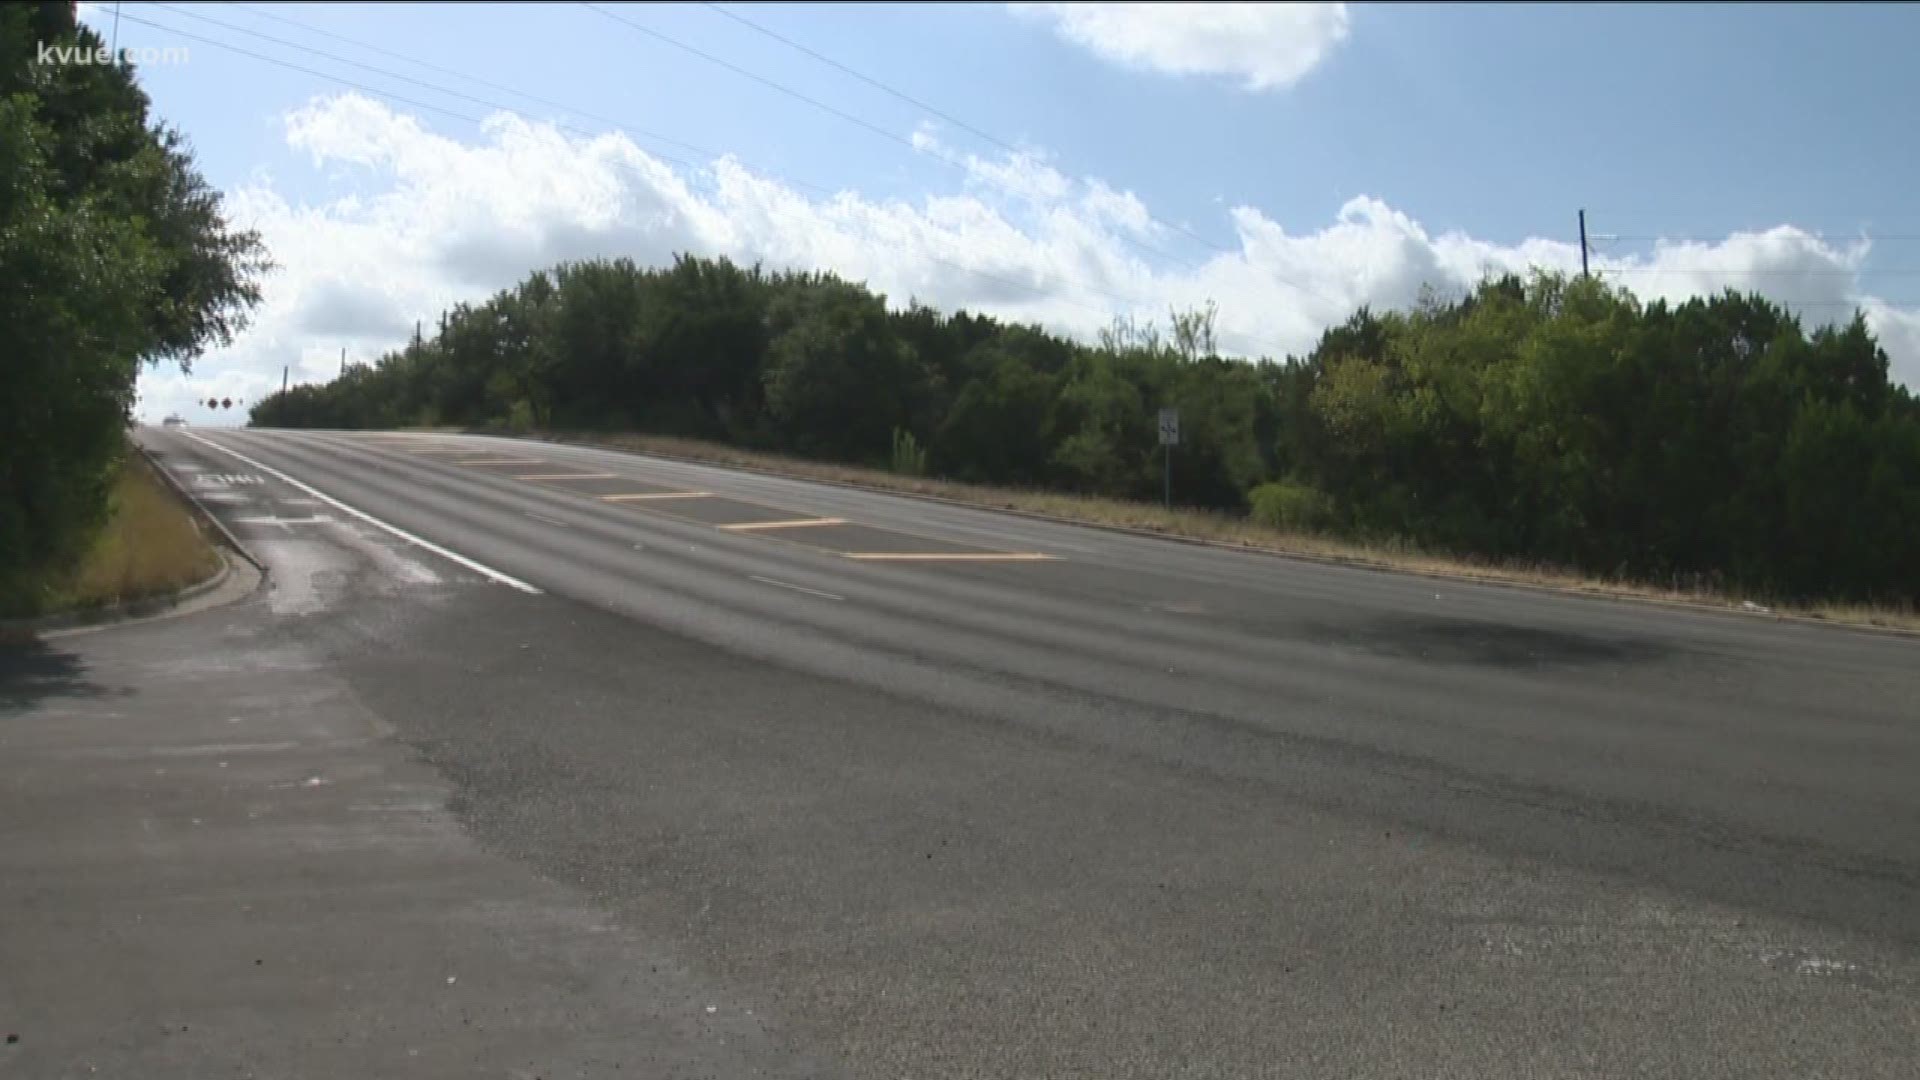 Many people have reached out concerning the safety of FM 2222 after the death of football player Cedric Benson.